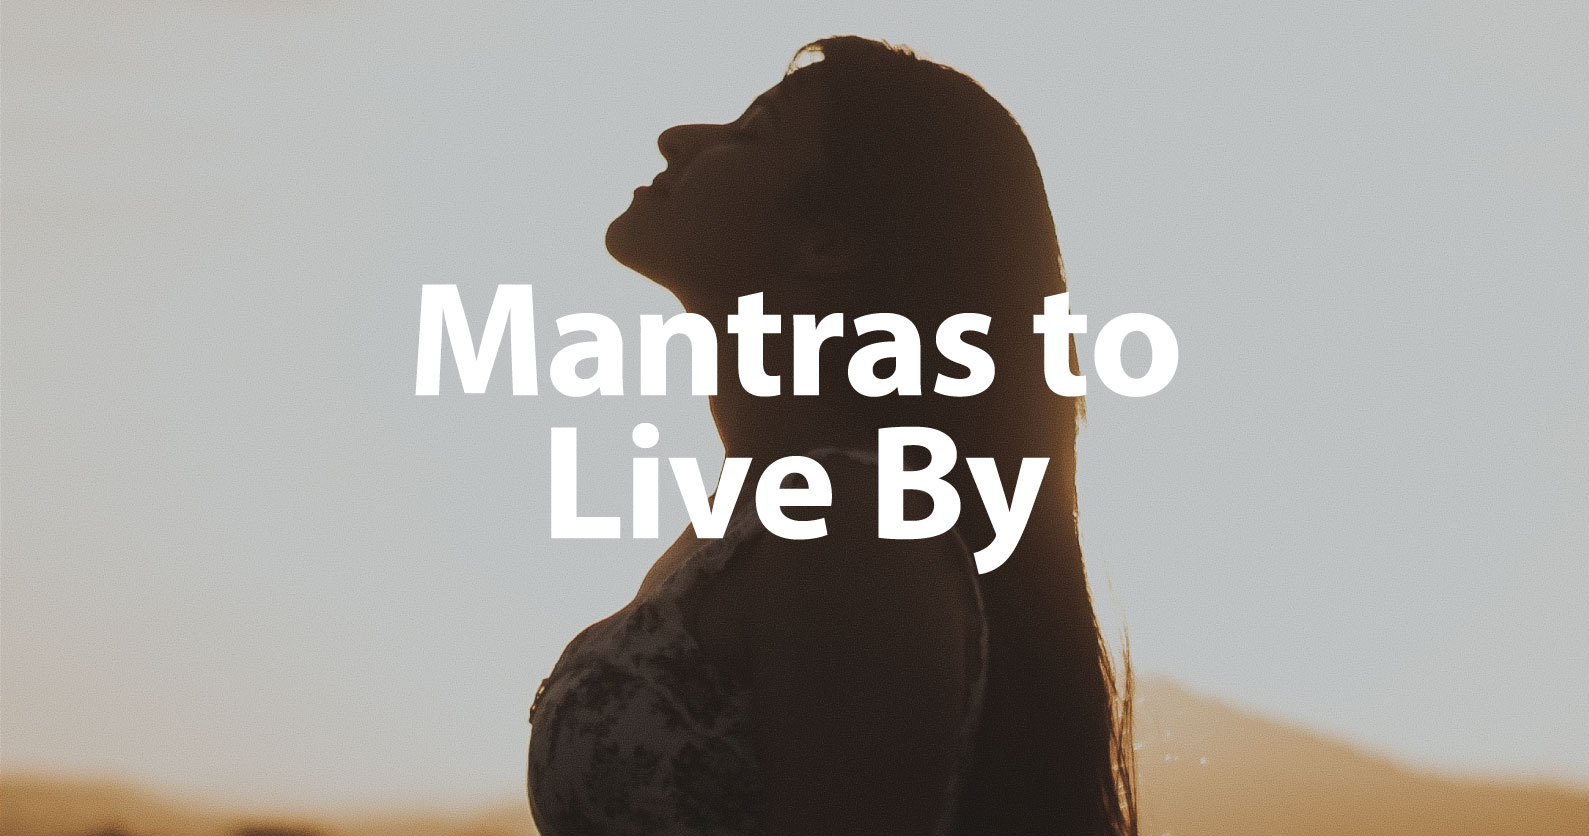 Best Short Mantras To Live By Positive Personal Mantras